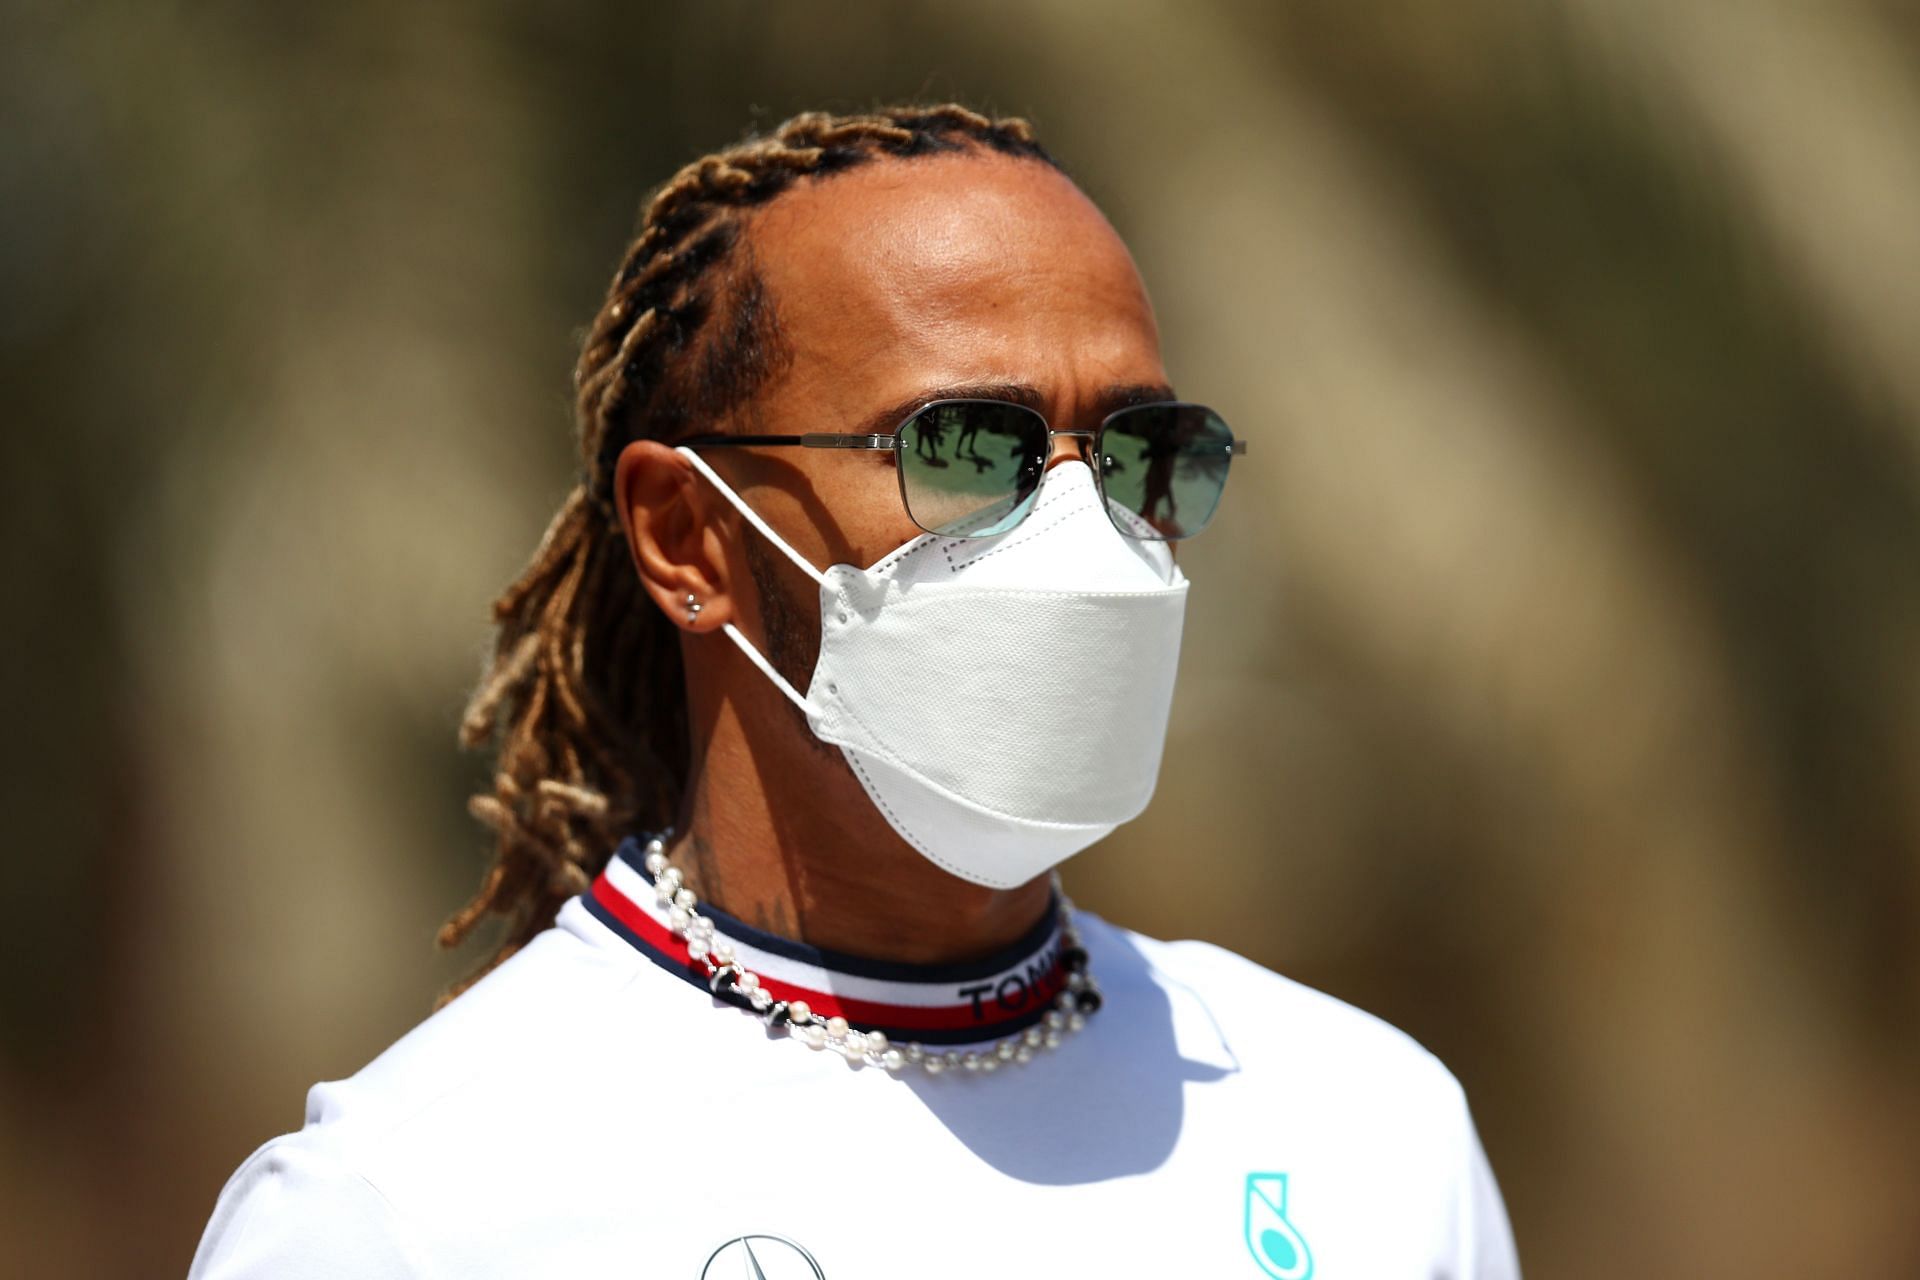 Lewis Hamilton in the Paddock ahead of the Bahrain GP (Photo by Lars Baron/Getty Images)